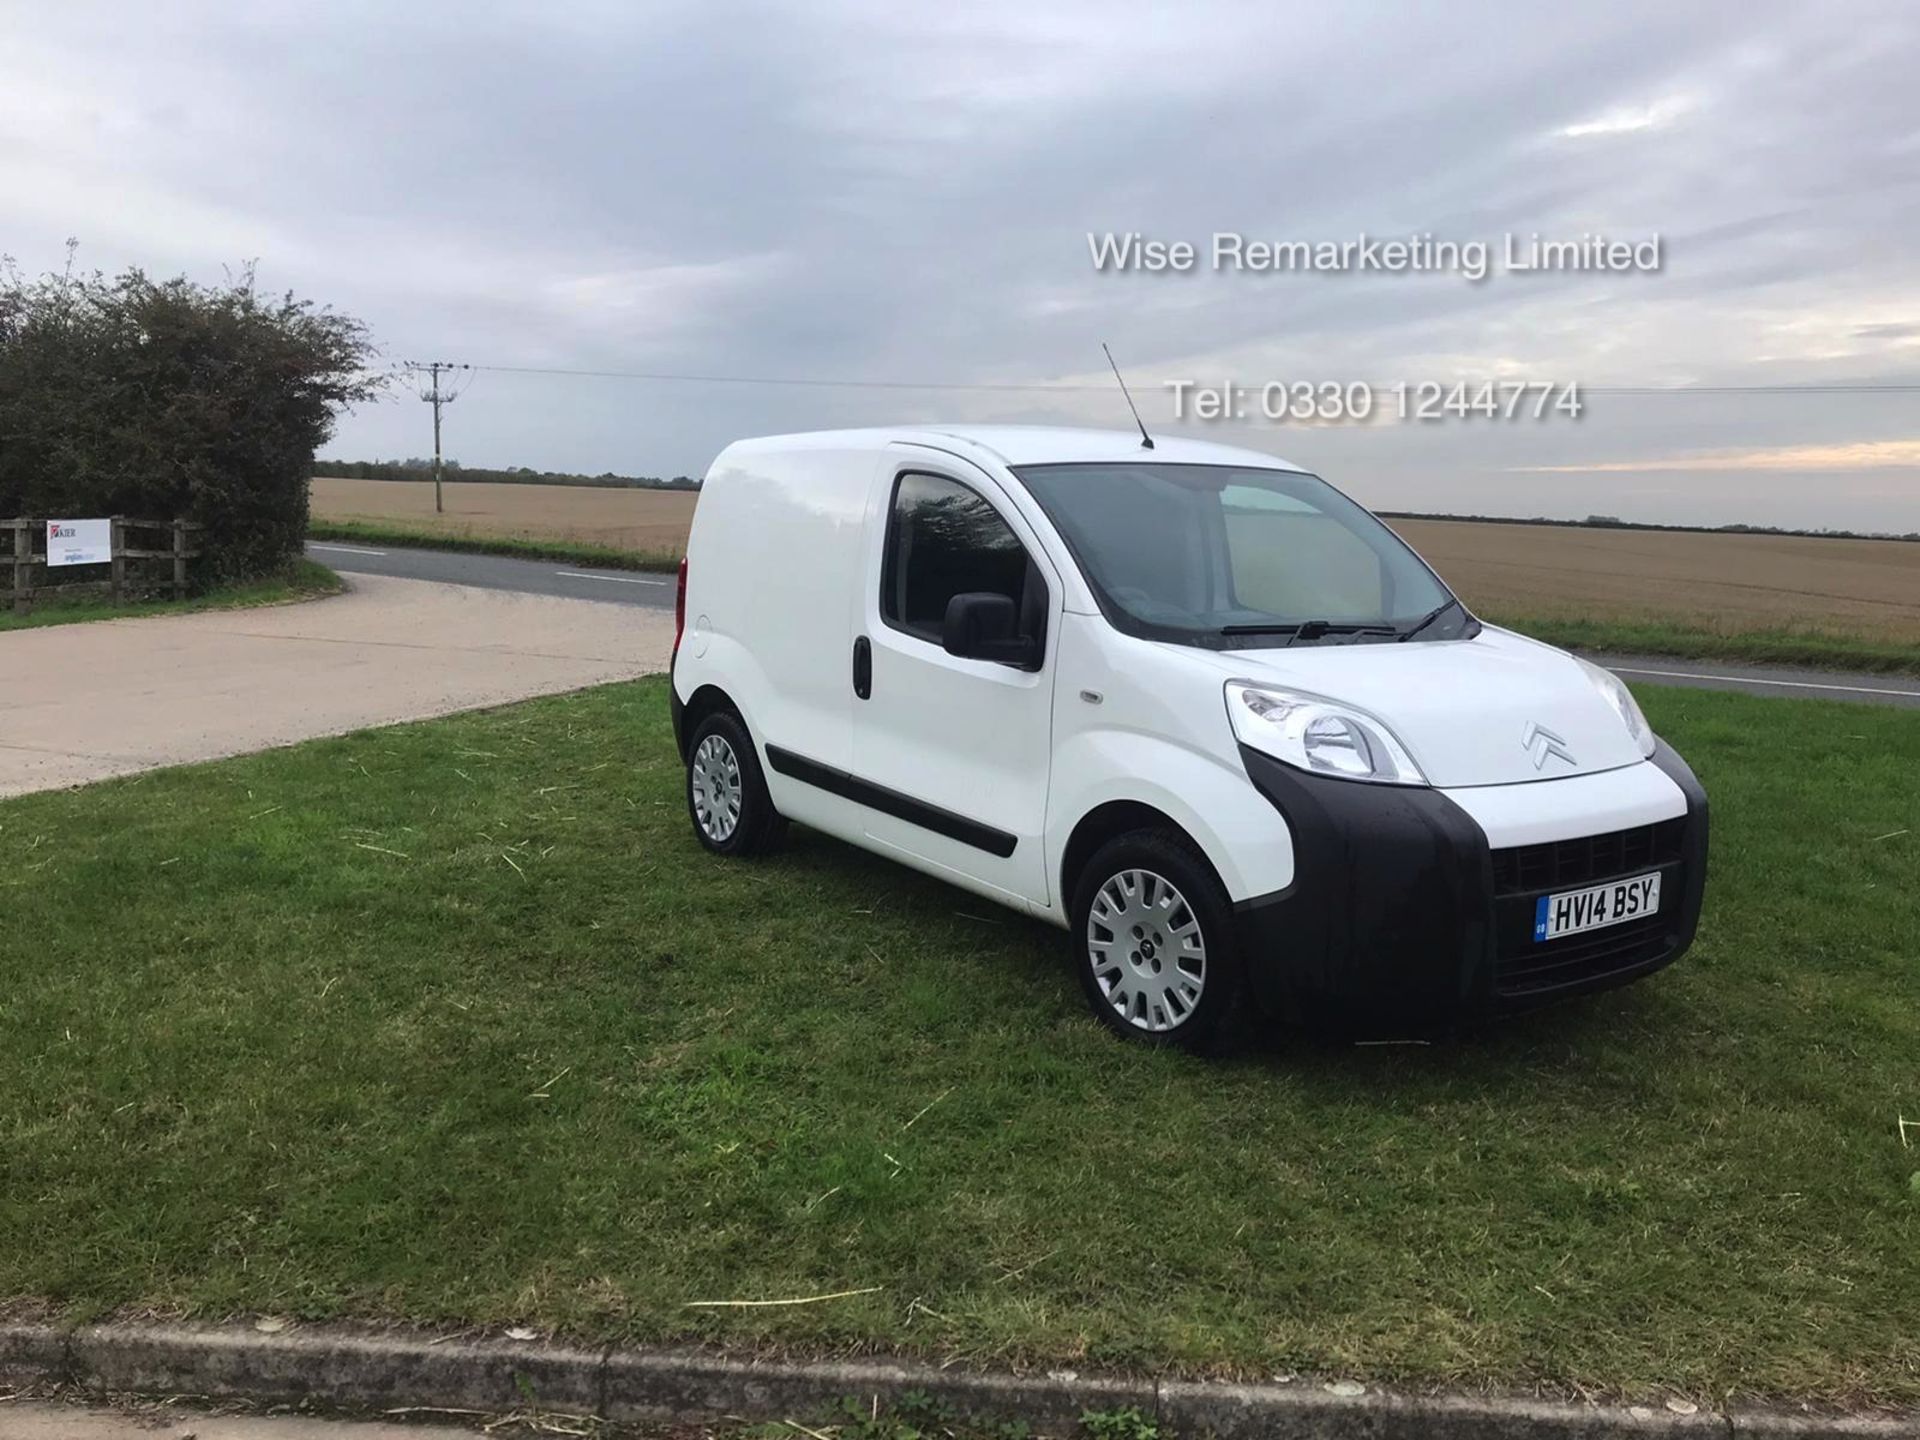 Citroen Nemo 660 Enterprise 1.3 DHi - 2014 14 Reg - 1 Owner From New - Air Con - Image 2 of 17